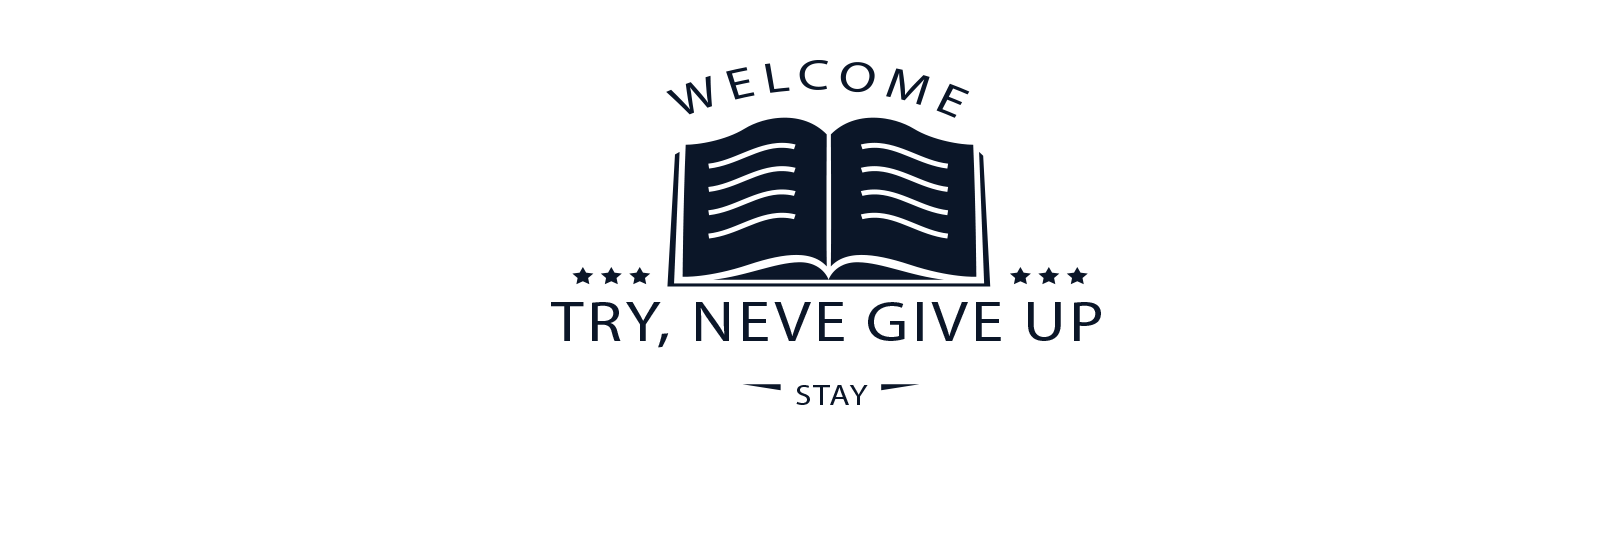 Try, Never Give Up